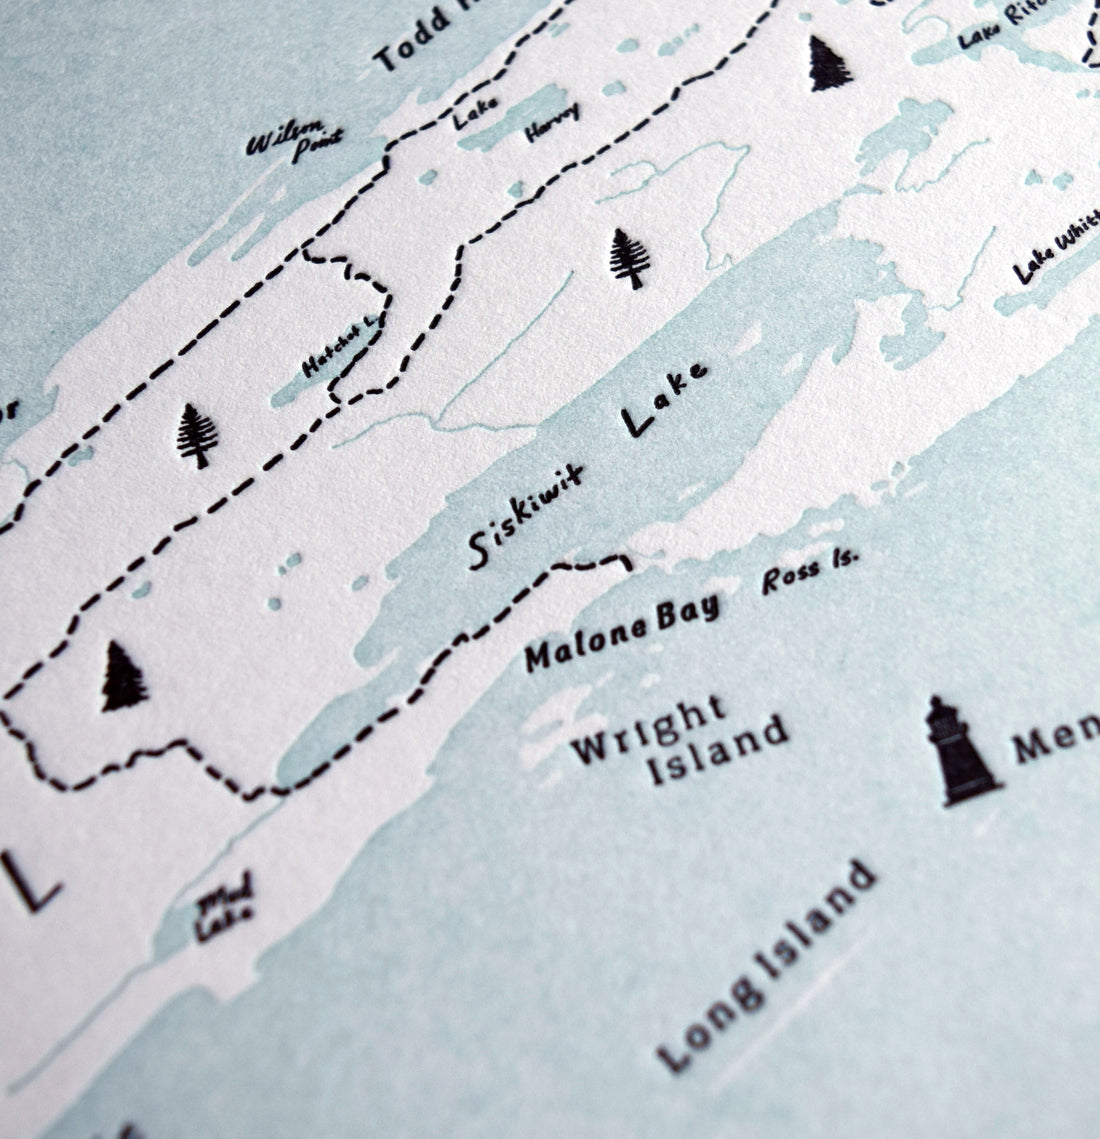 Hand drawn letterpress printed map of Isle Royale with prominent landmarks identified.